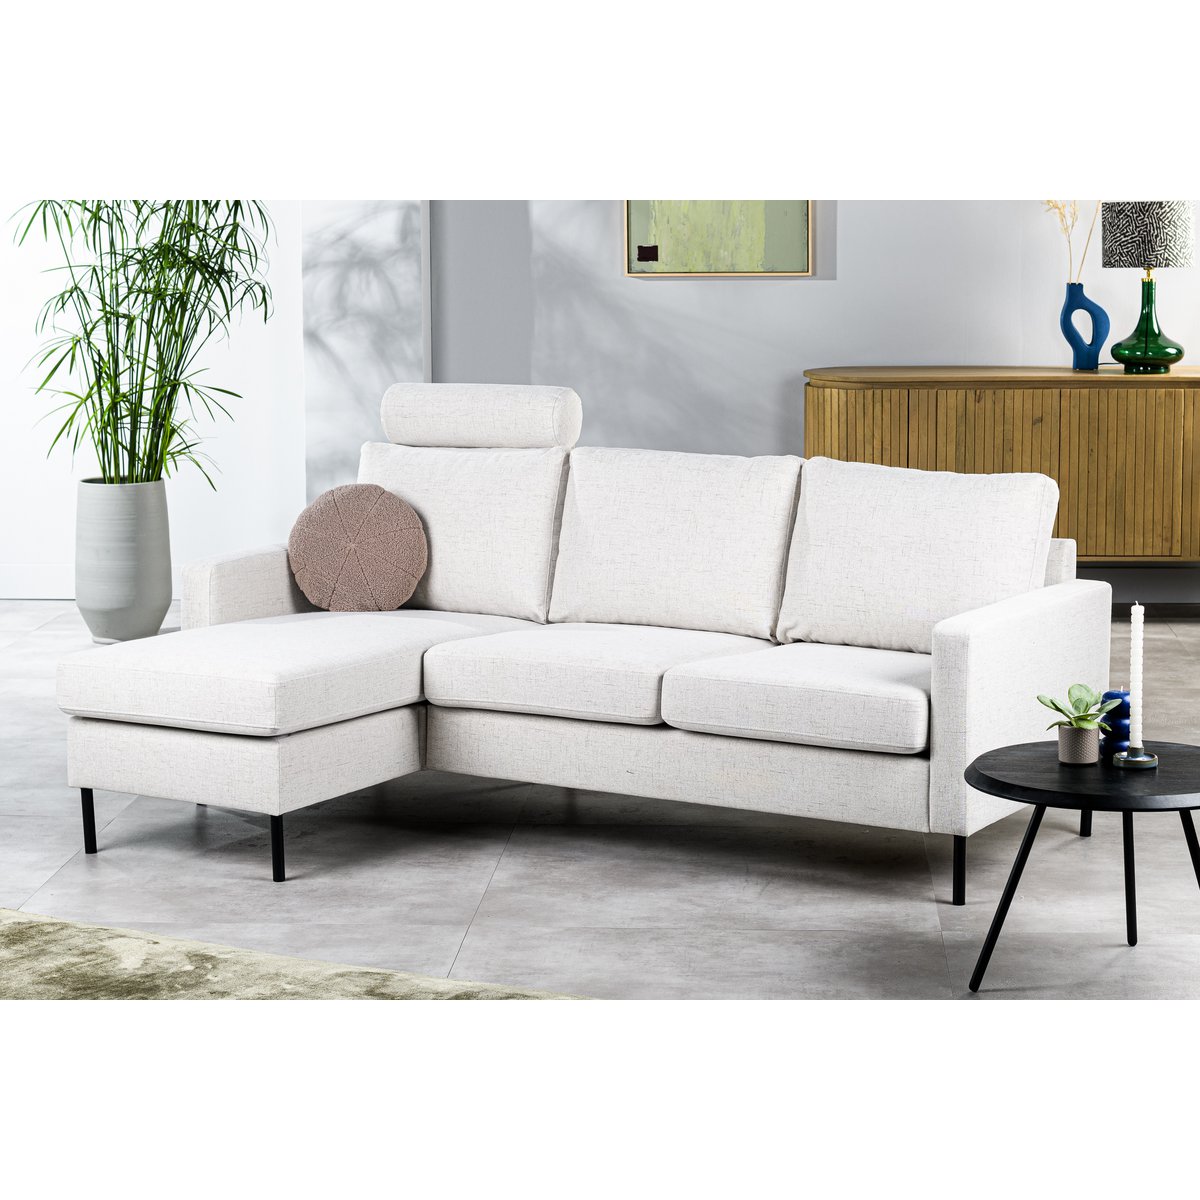 3 seater sofa CL L+R, with headrest, fabric Valente, V920 natural